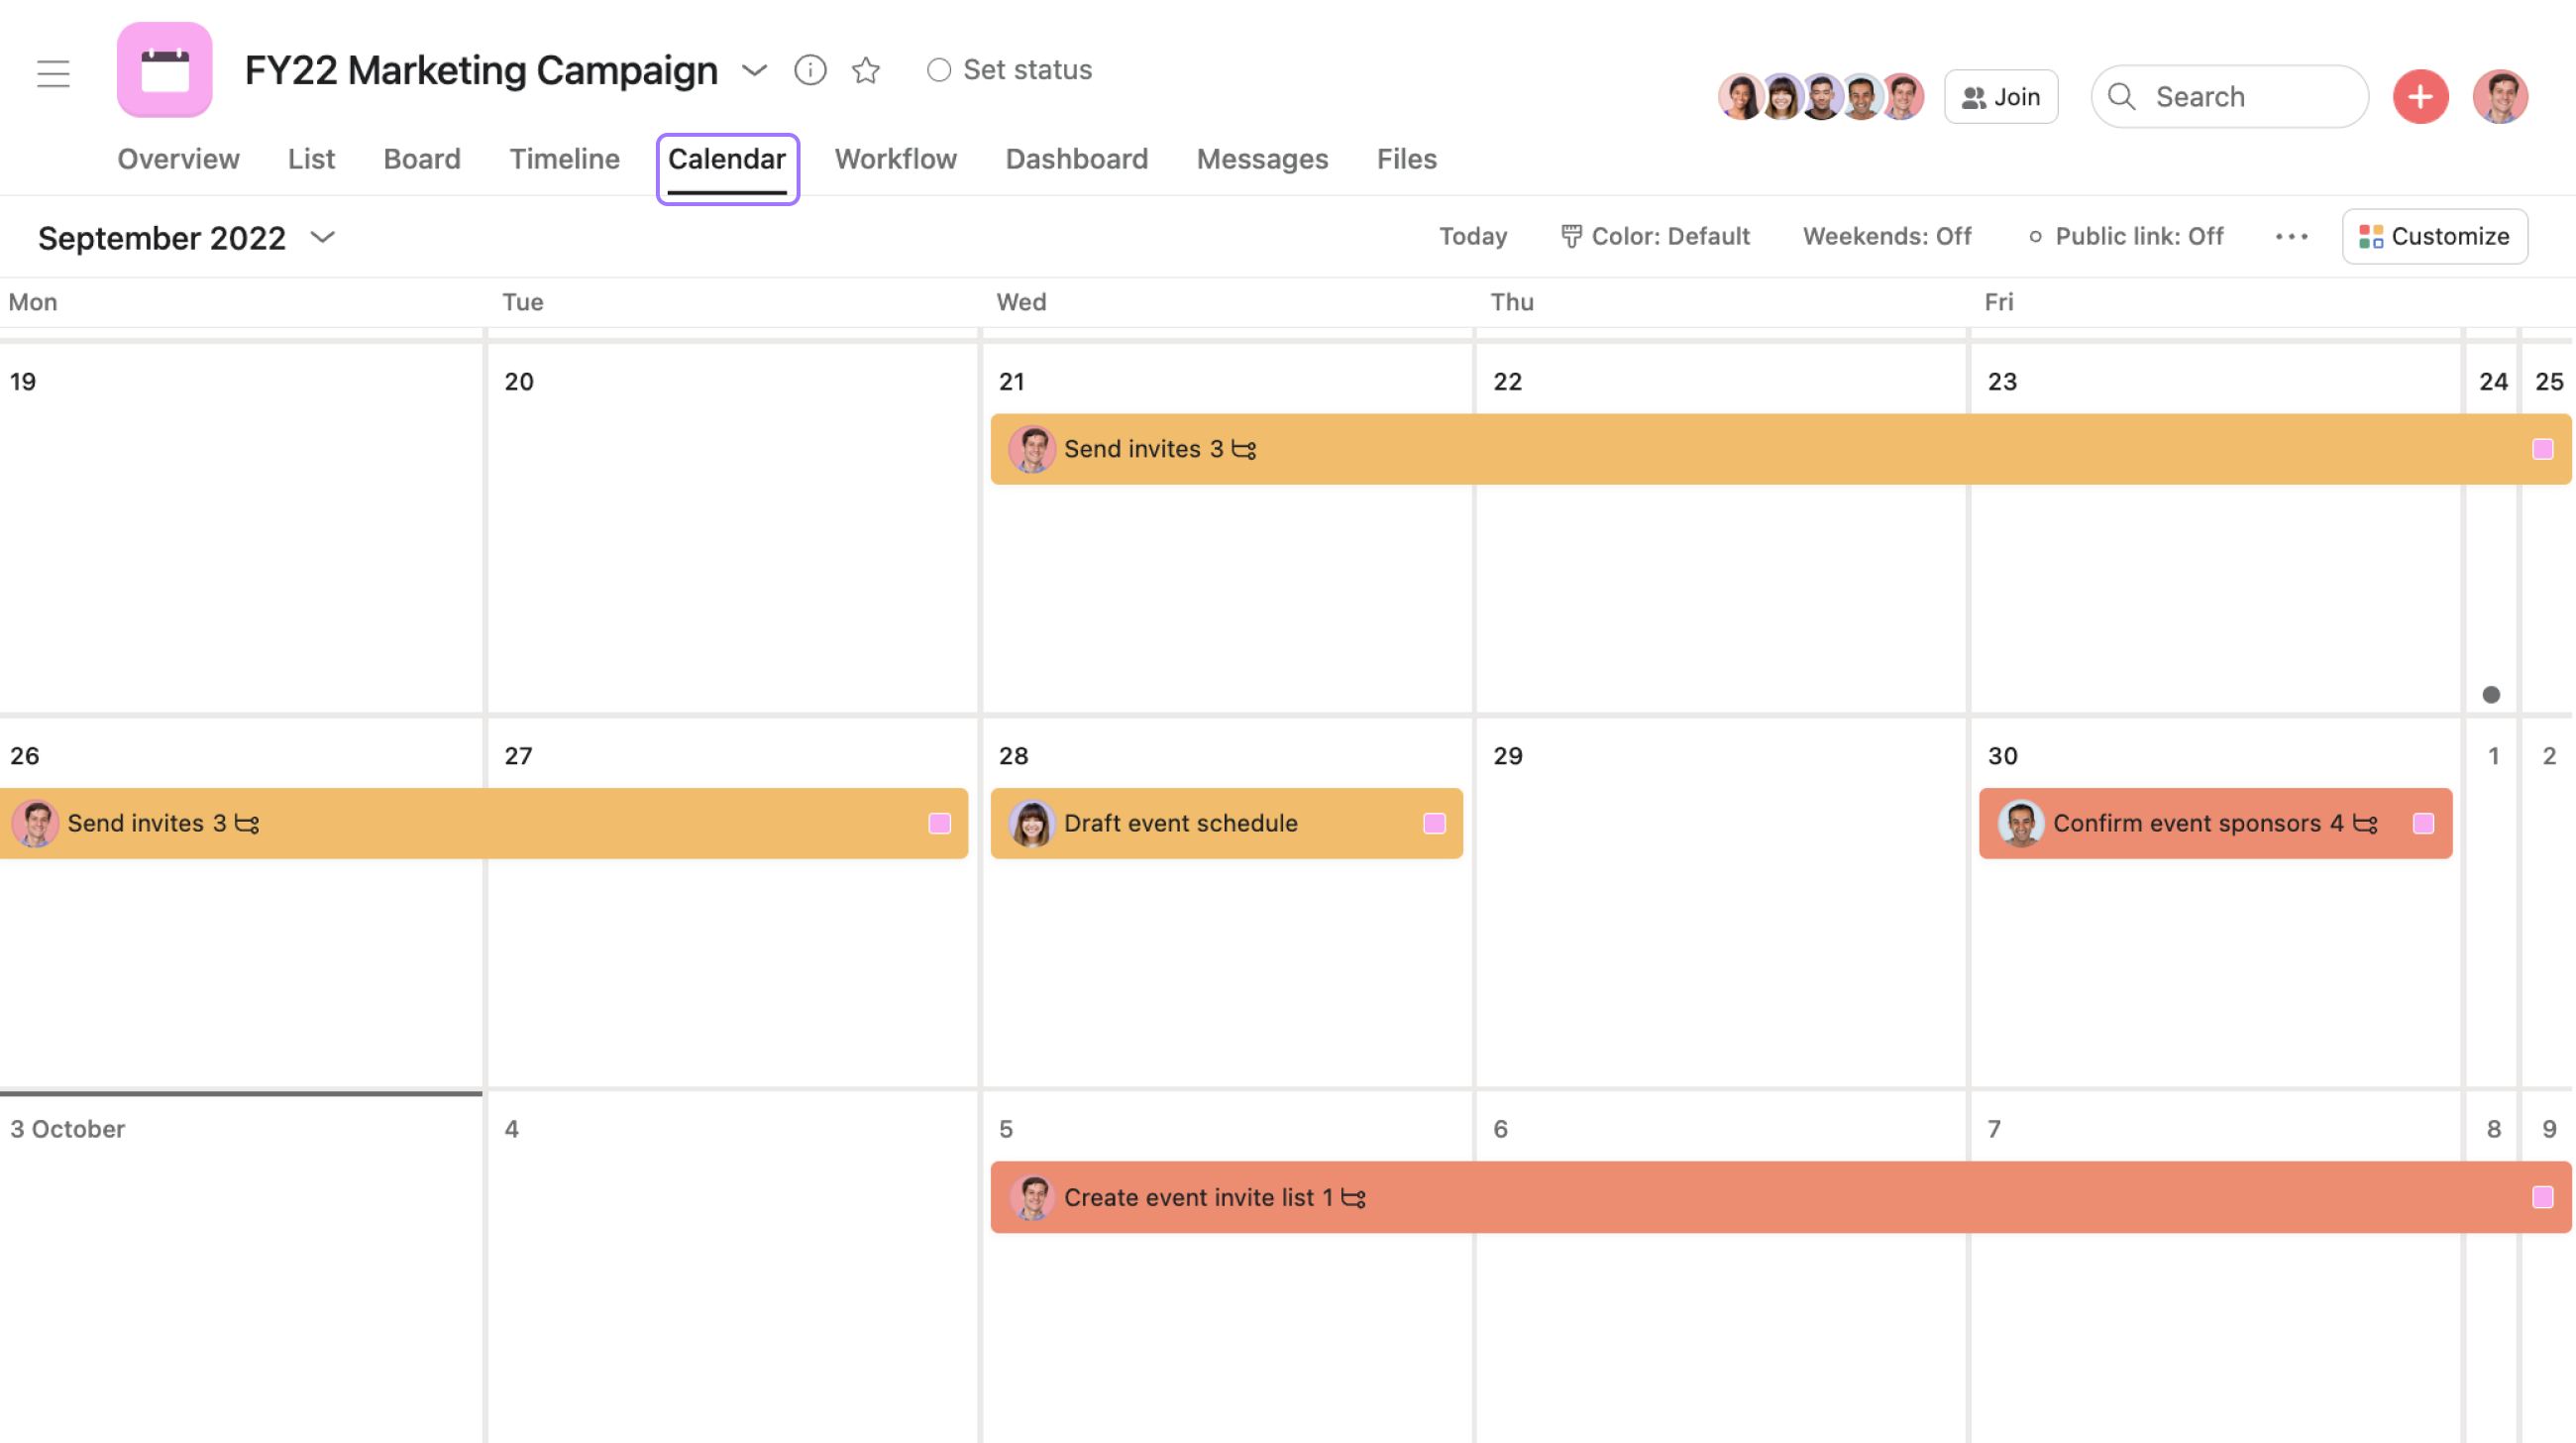 SCREENSHOT of Calendar View in My Tasks to plan and manage your work schedule